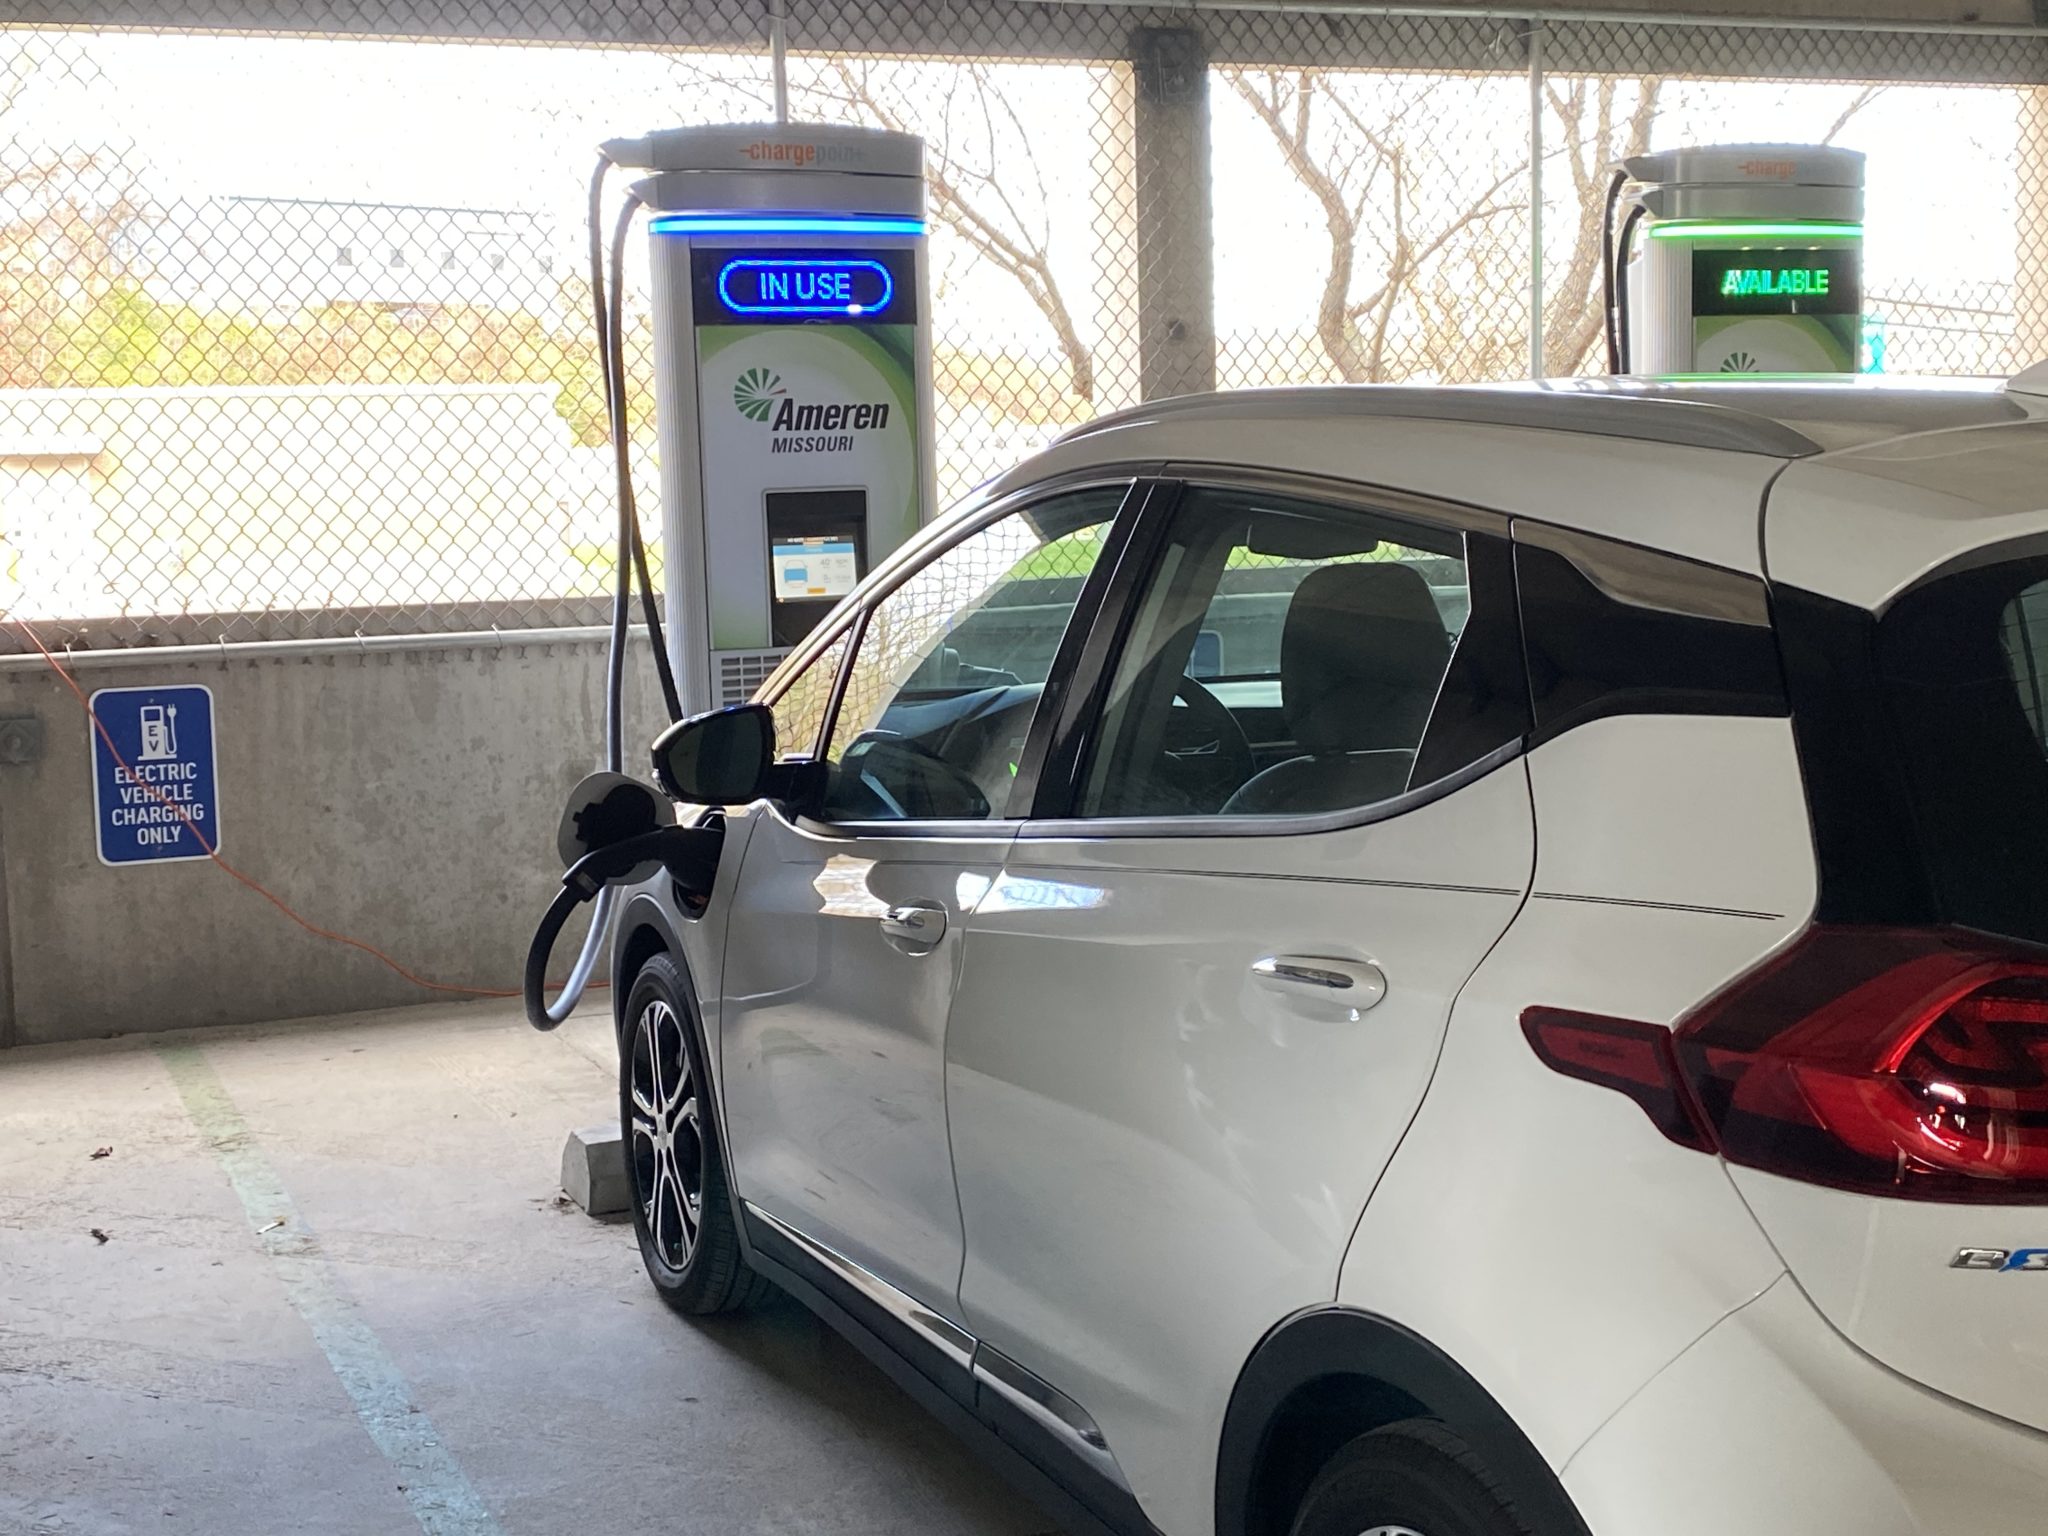 Ameren, Marriott unveil new electric vehicle charging station in